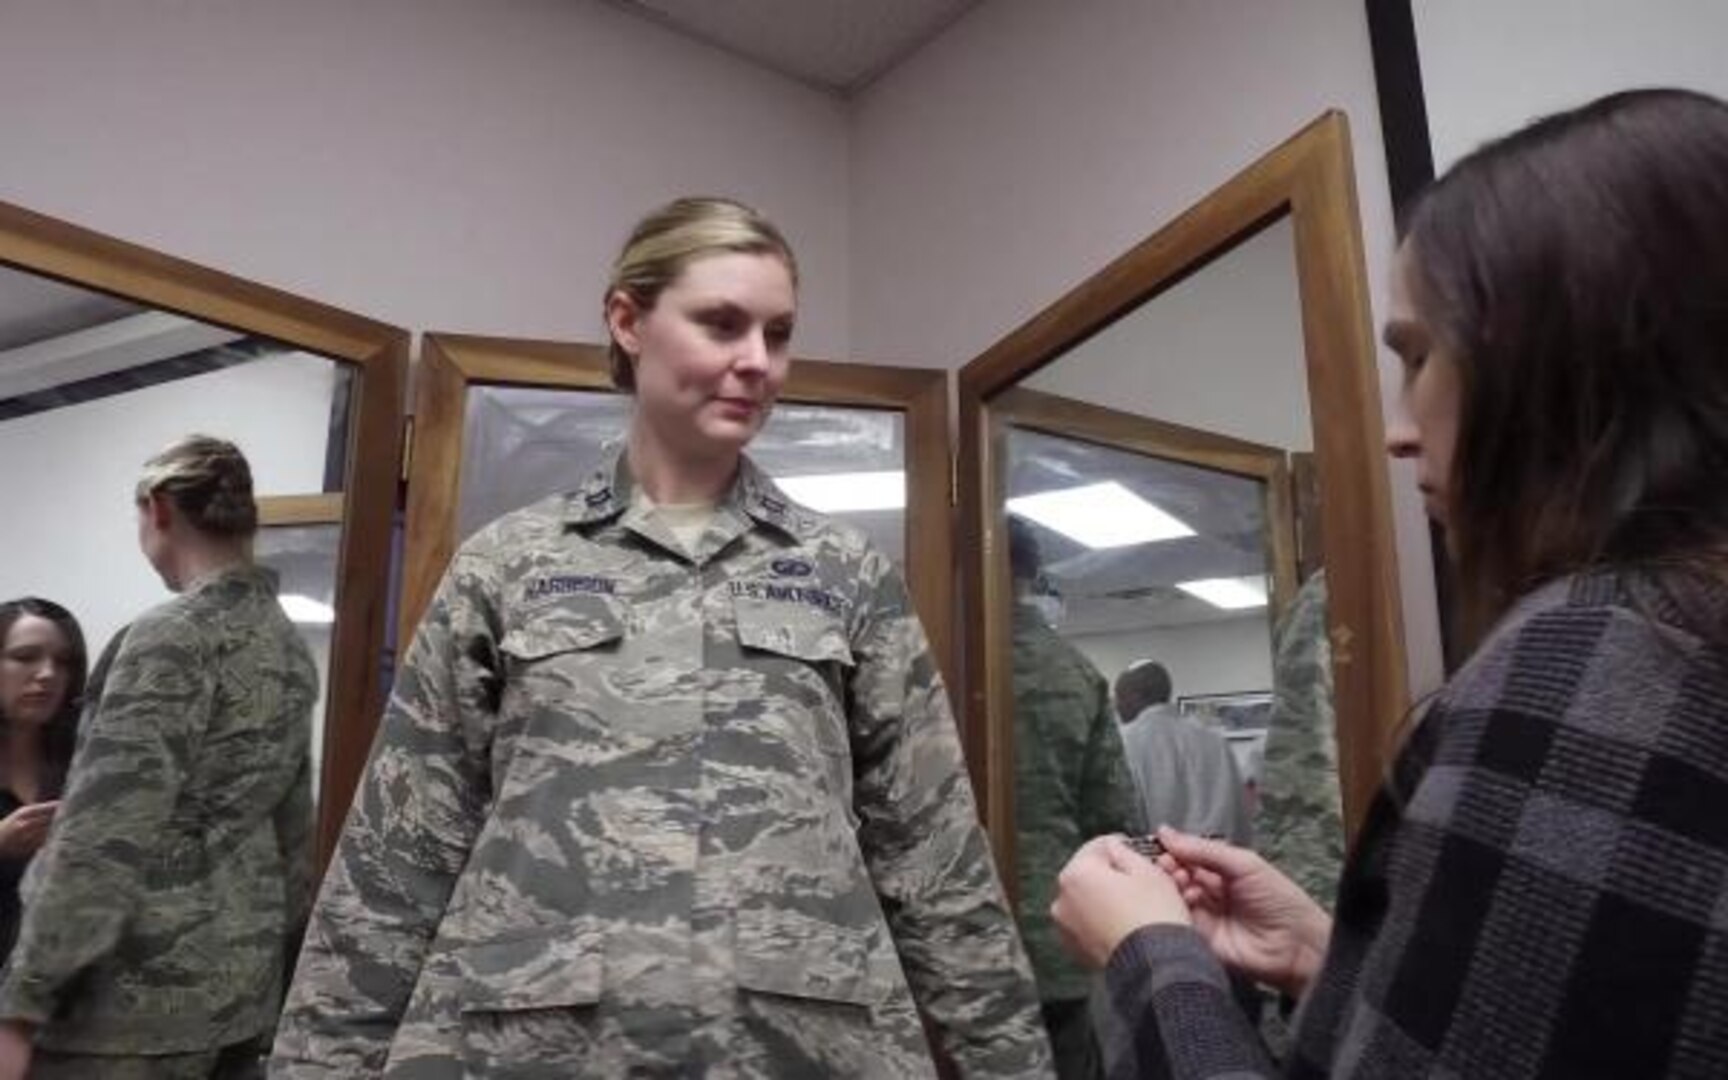 DLA provides maternity uniforms that help airmen ‘fit in’ while ‘sticking out’